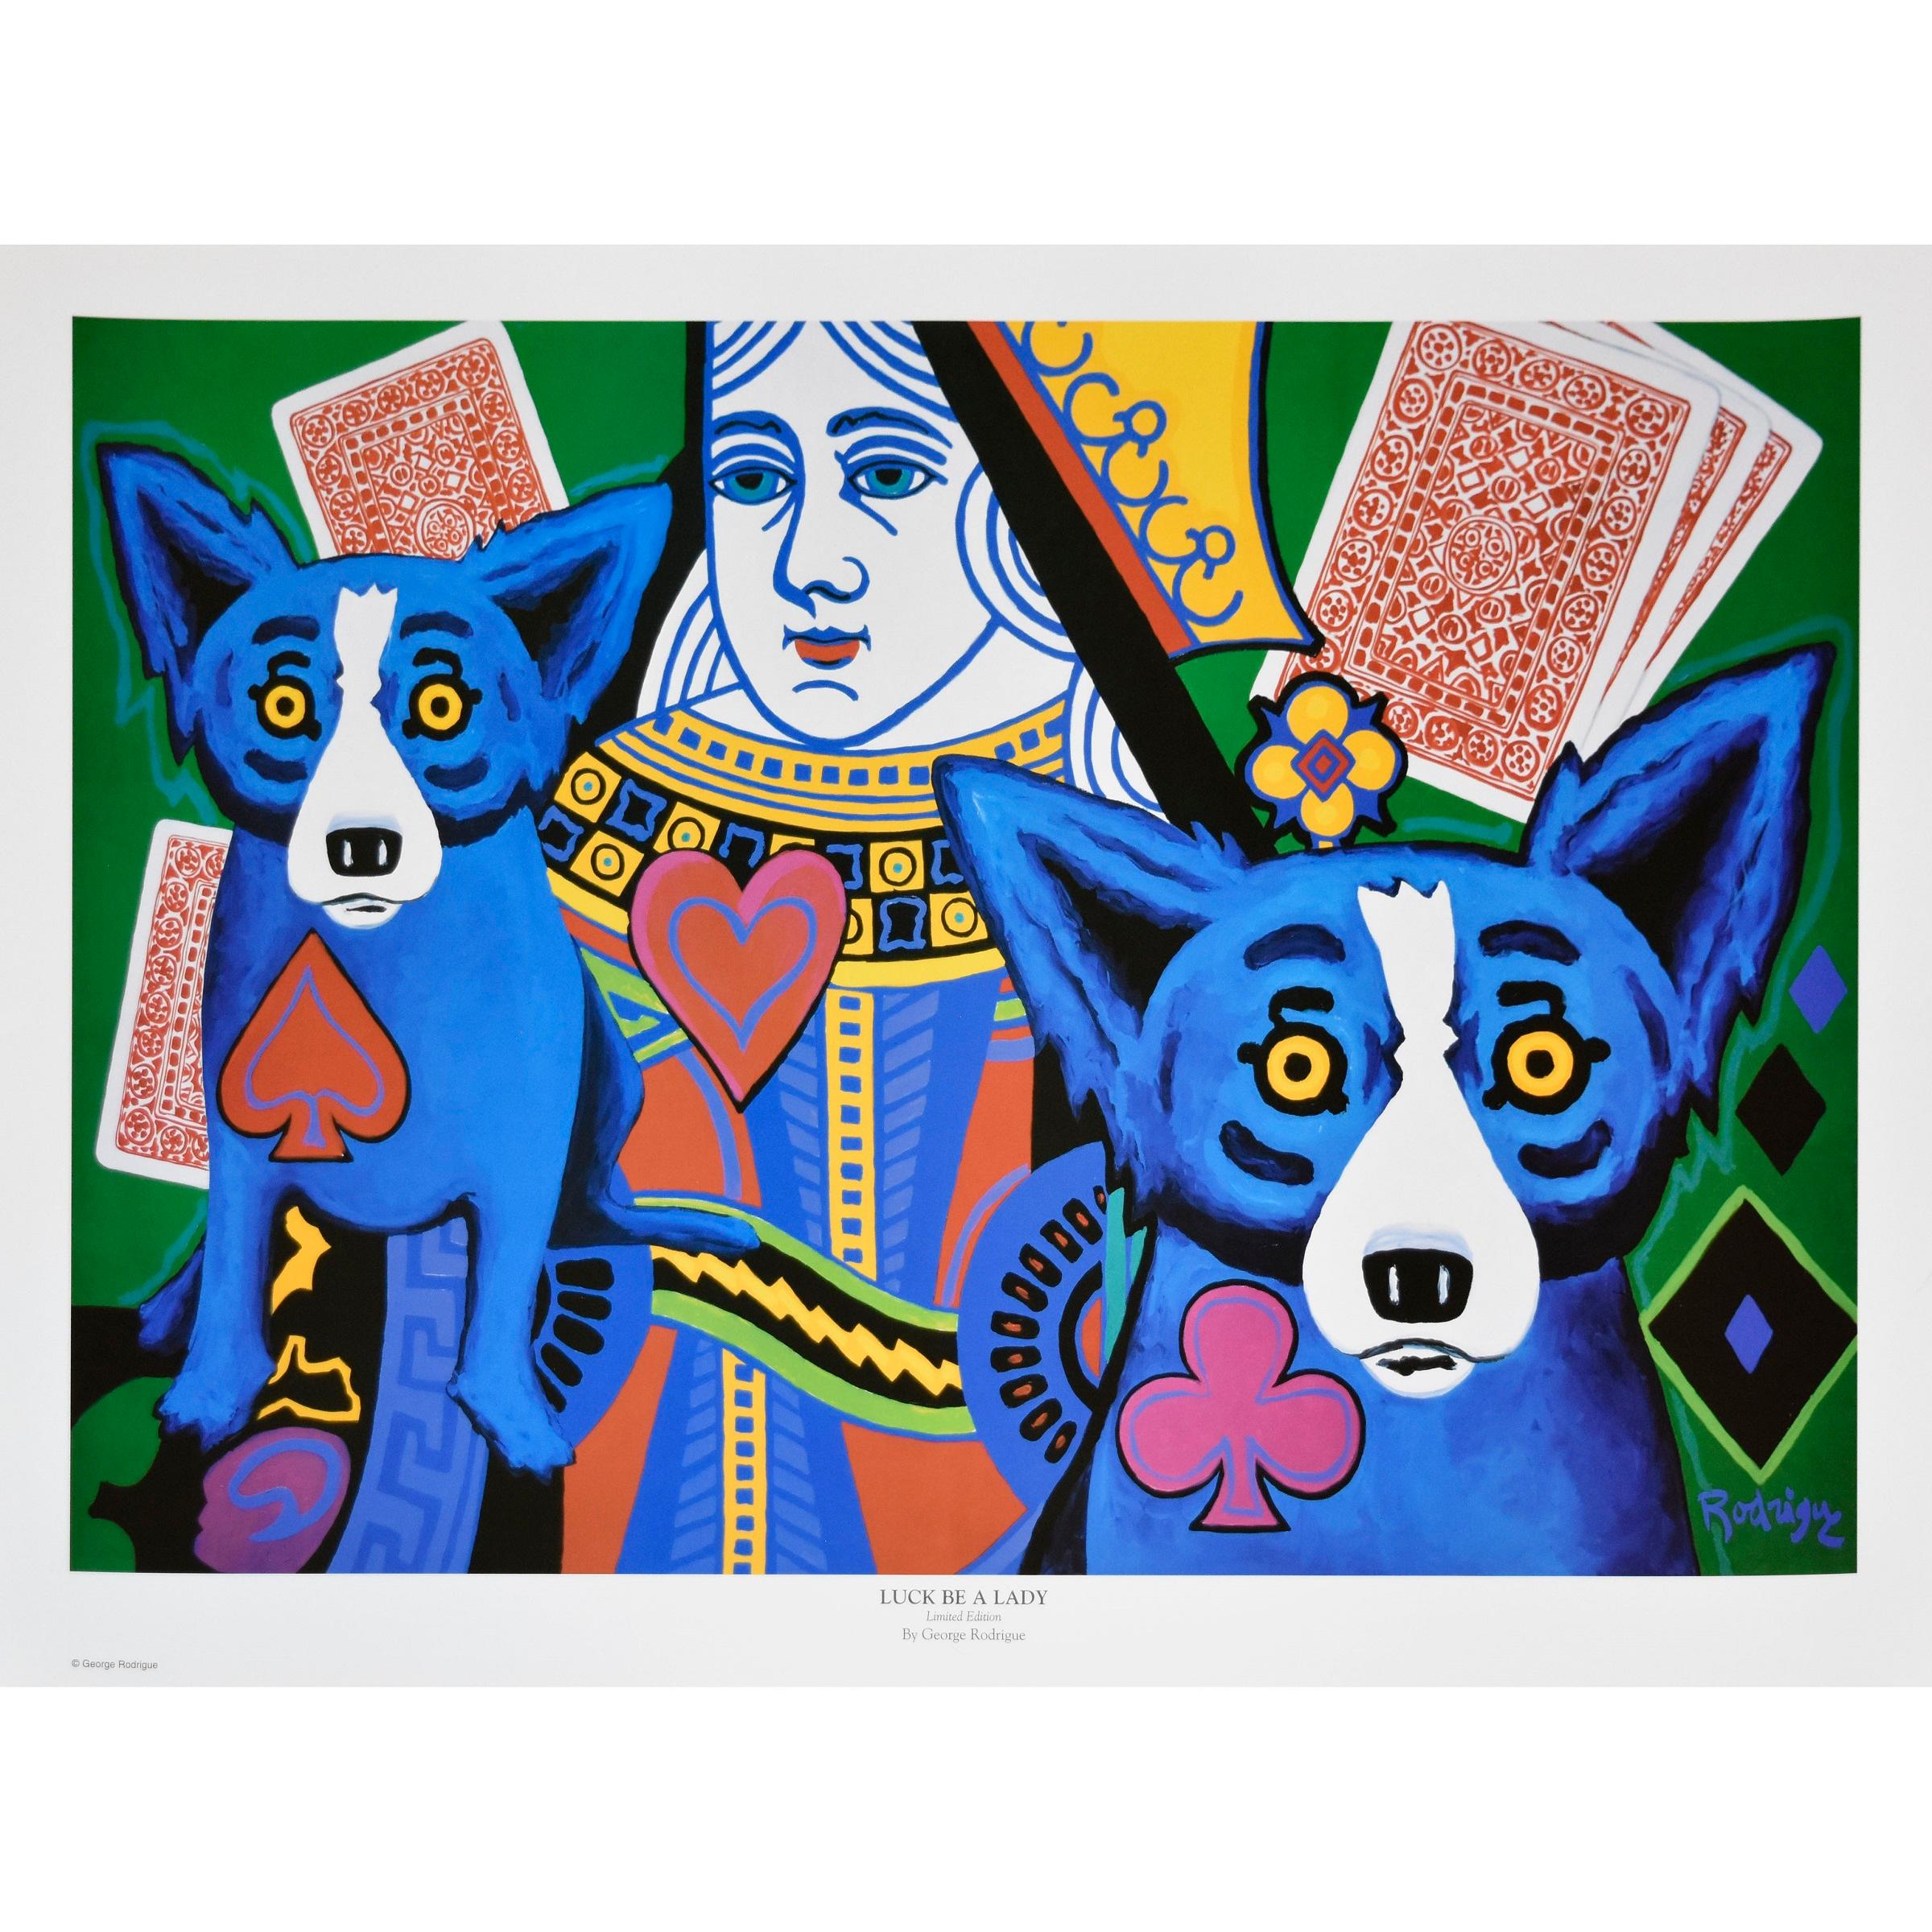 George Rodrigue Animal Print - Blue Dog "Luck Be a Lady"